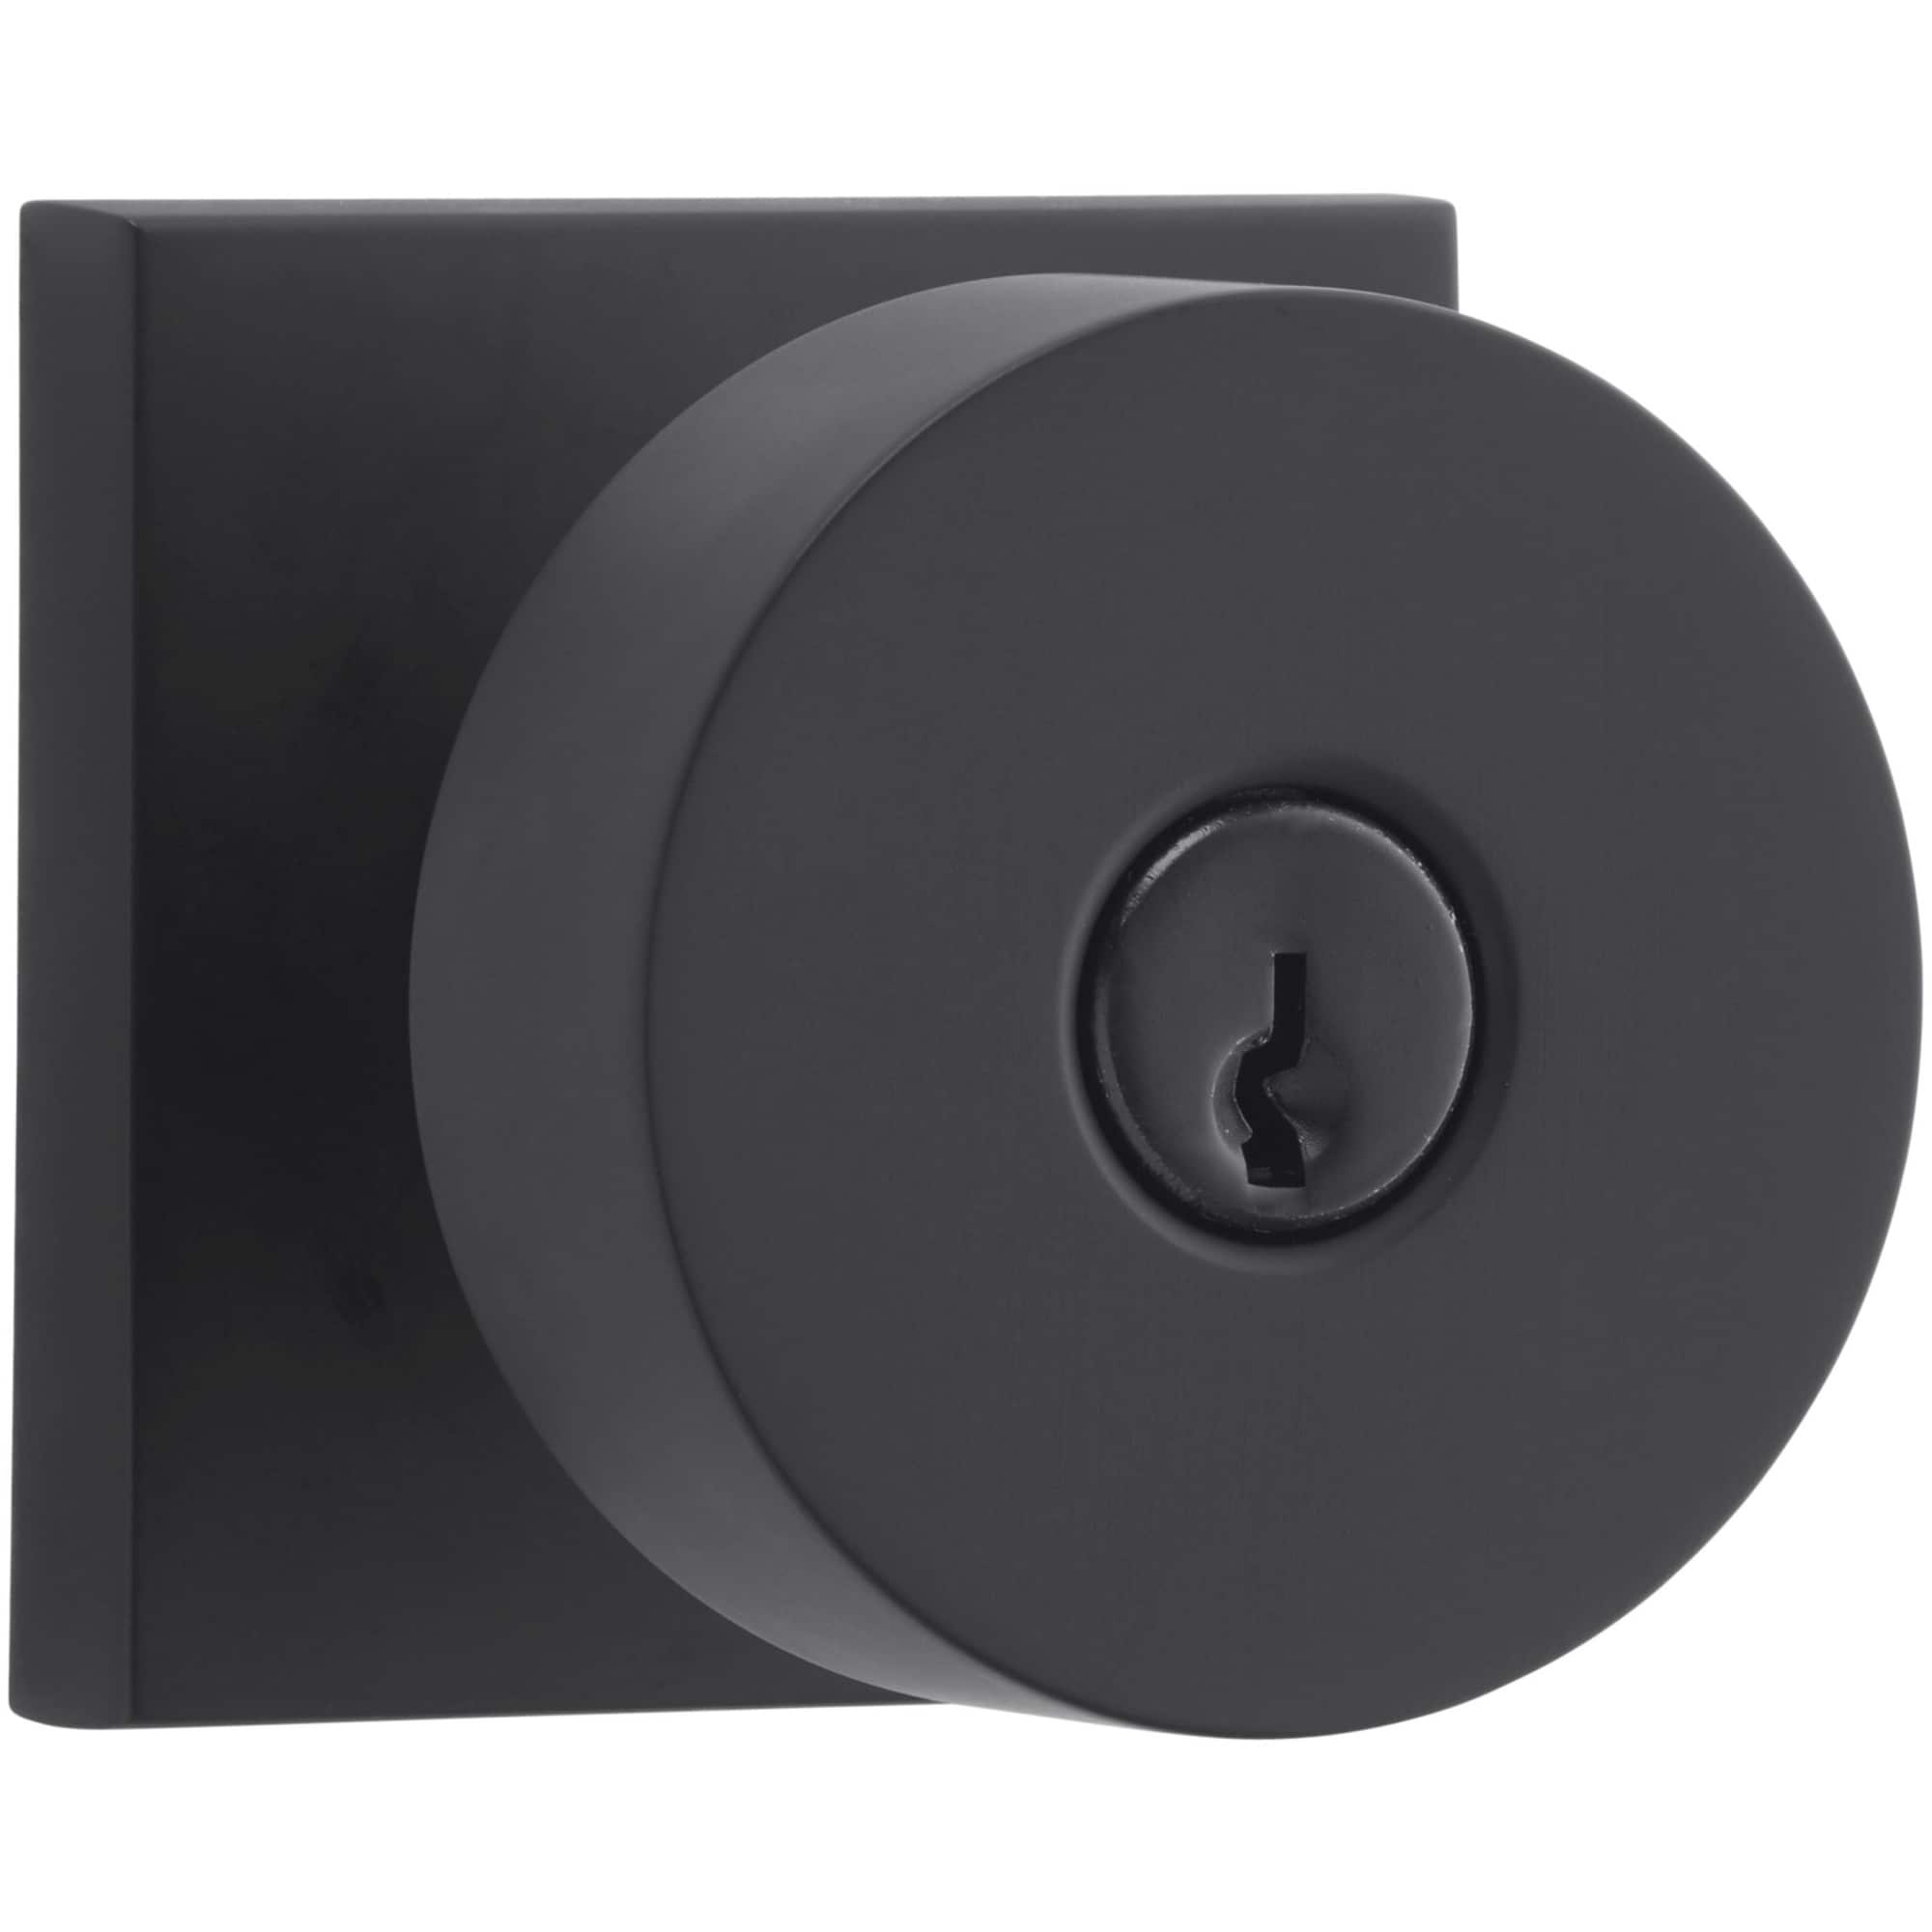 Baldwin Contemporary Single Cylinder Keyed Entry Door Knob with Square  Bed Bath  Beyond 16081185